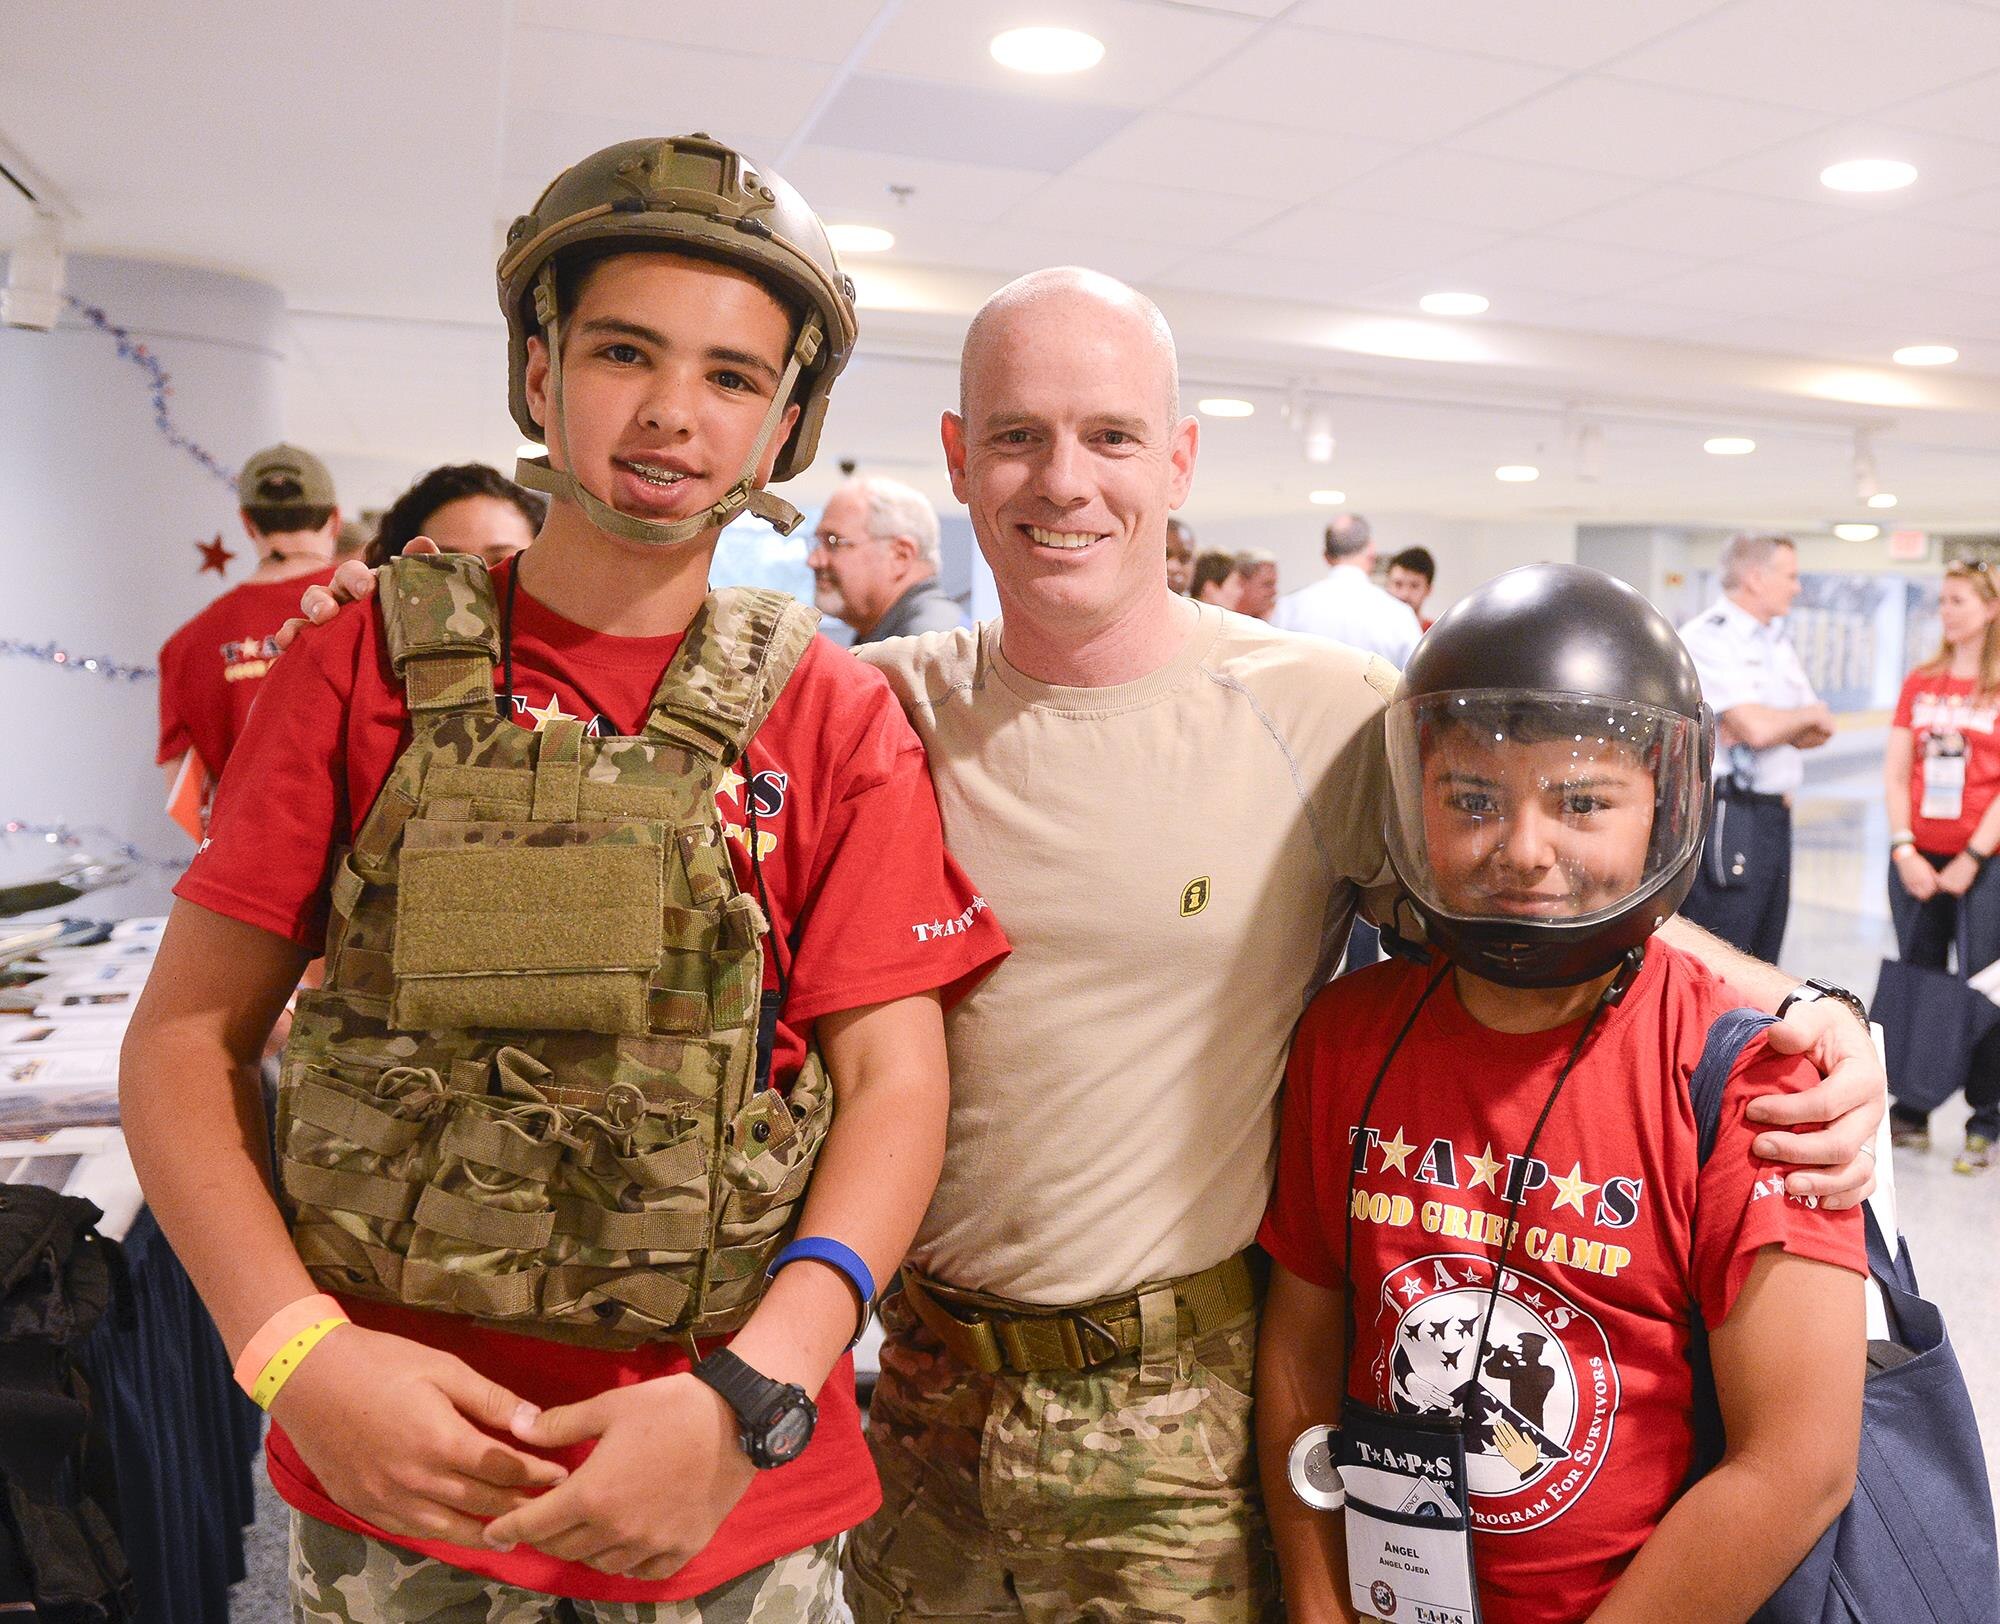 Lt. Col Chuck Bris-Bois, a combat rescue specialist, helps children try on special operations gear at the Pentagon in Washington, D.C., May 27, 2016. Defense Secretary Ash Carter and his wife Stephanie hosted more than 300 family members during family night in the Pentagon. (U.S. Air Force photo/Andy Morataya)